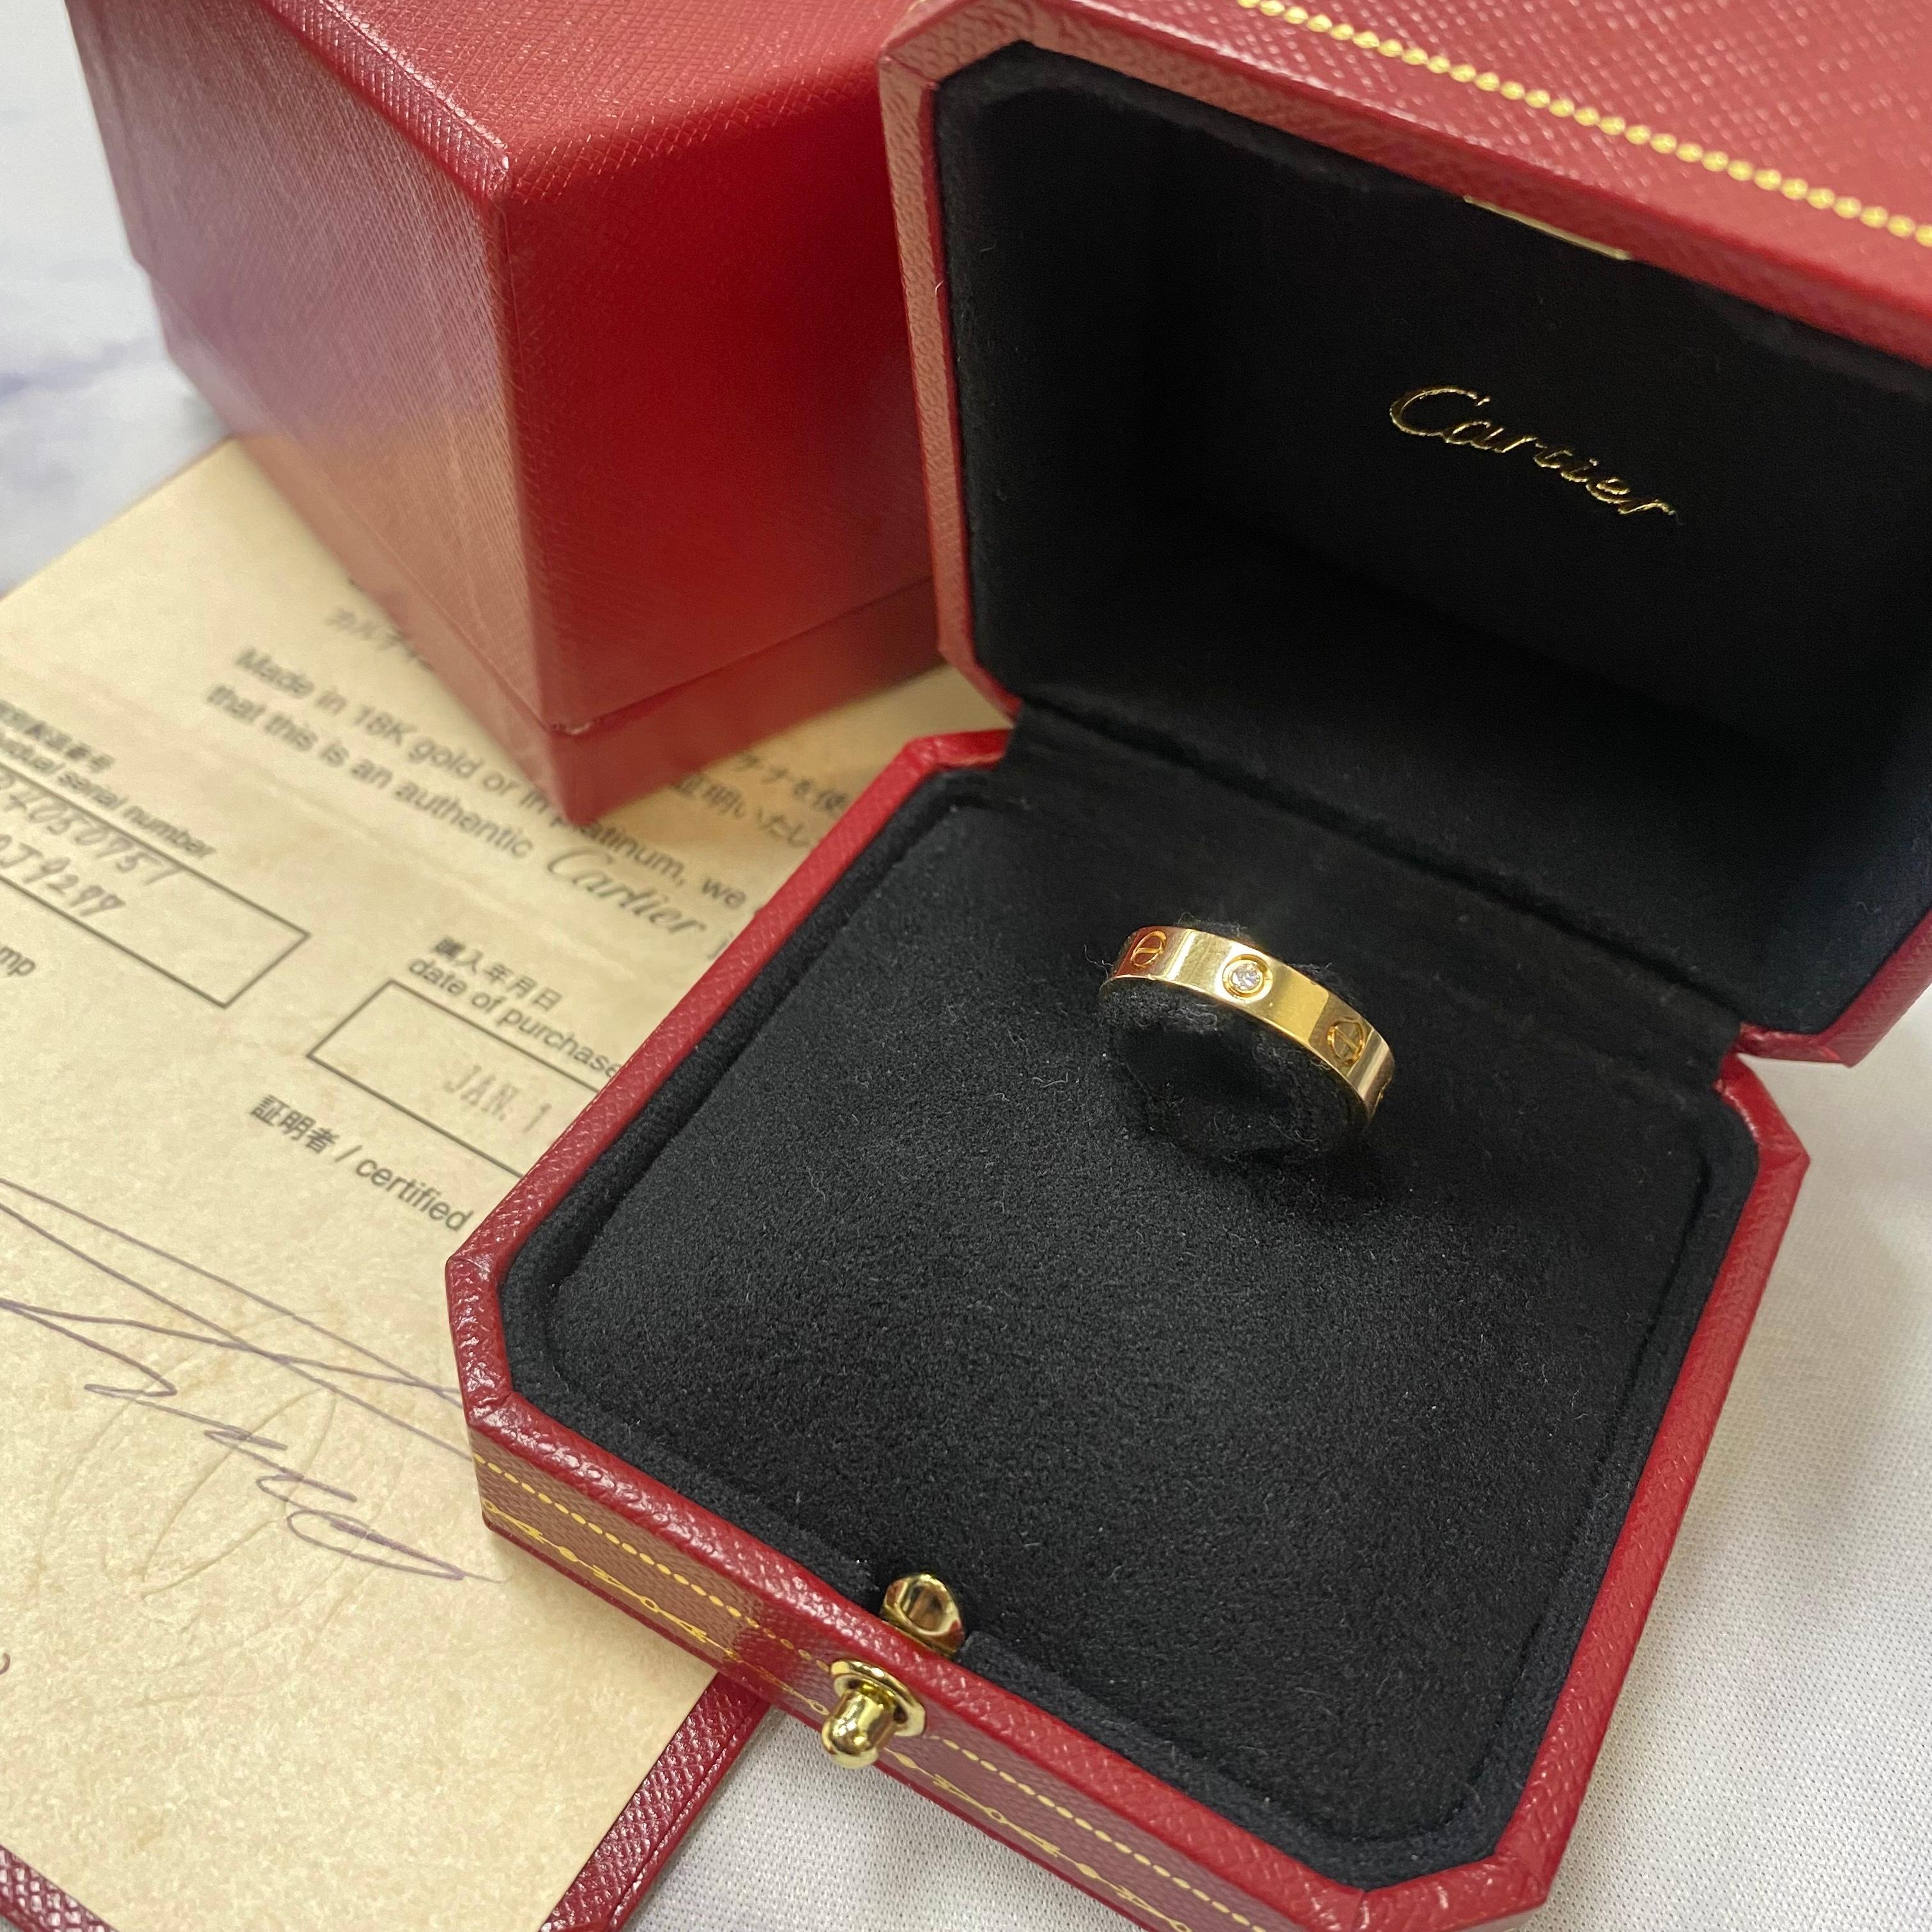 Cartier Love 1 Diamond Wedding Band 18K Yellow Gold In Excellent Condition For Sale In New York, NY